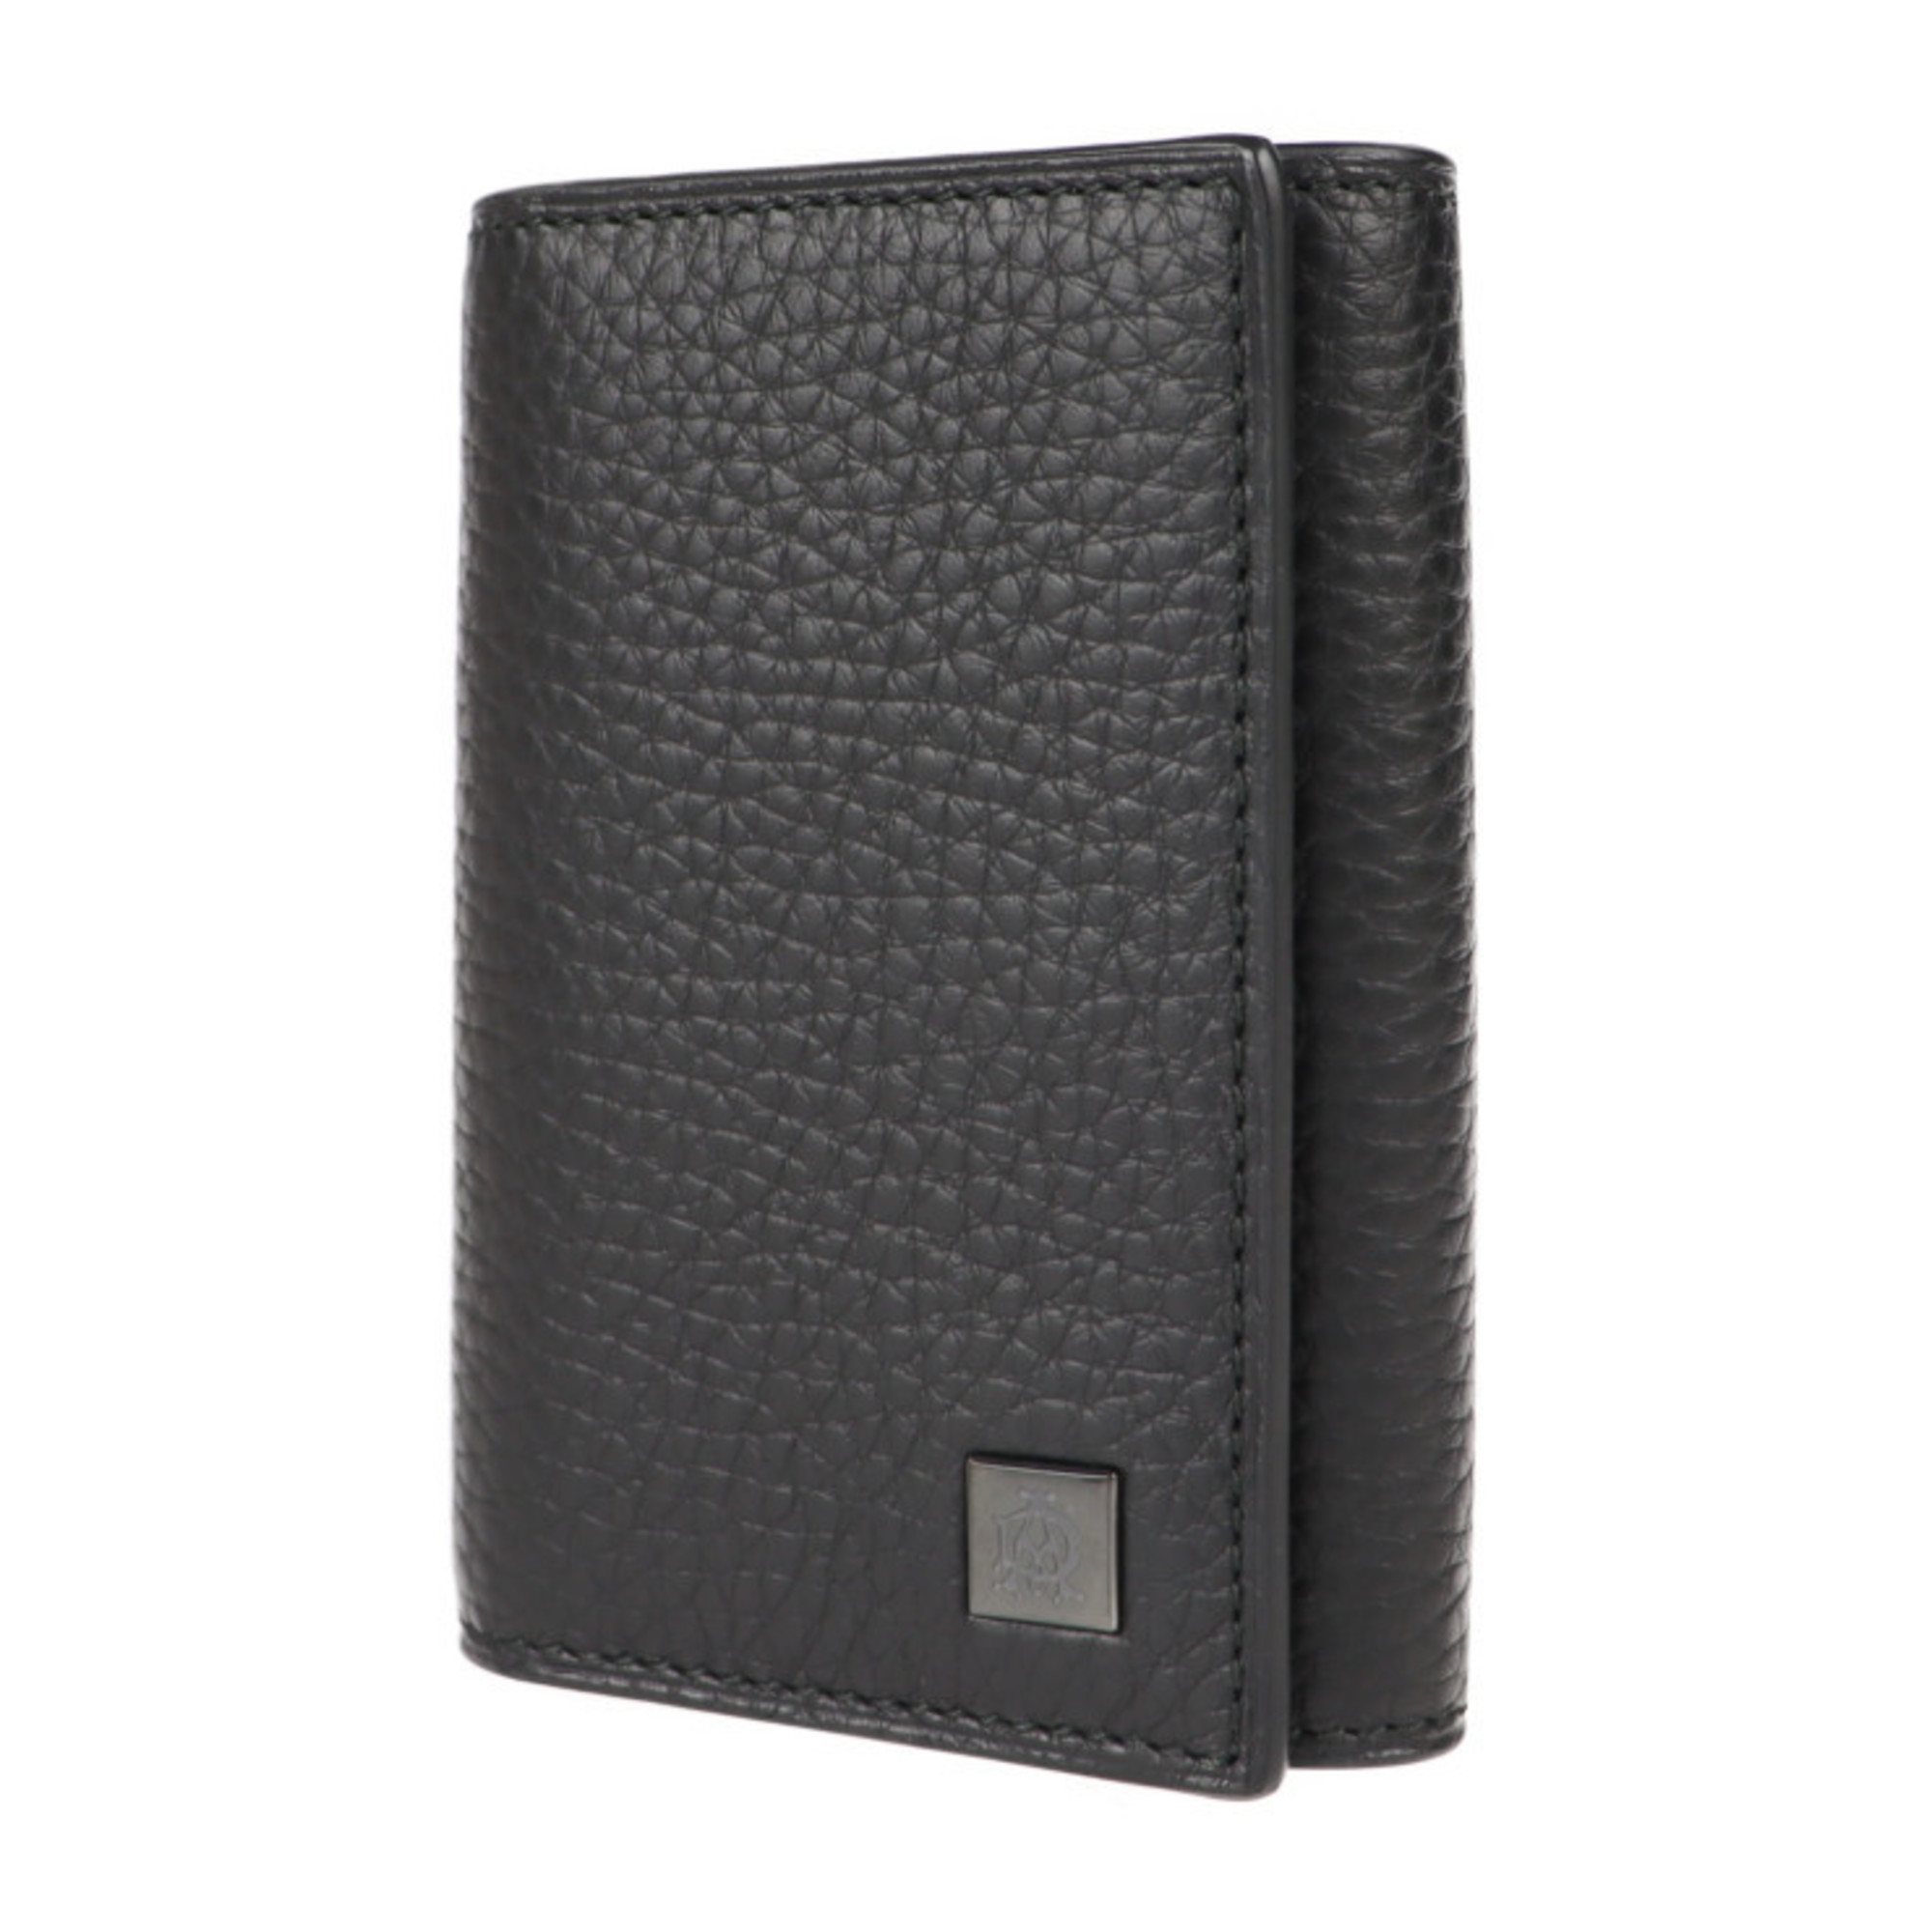 Dunhill Windsor Key Case Leather Black 6 Rows